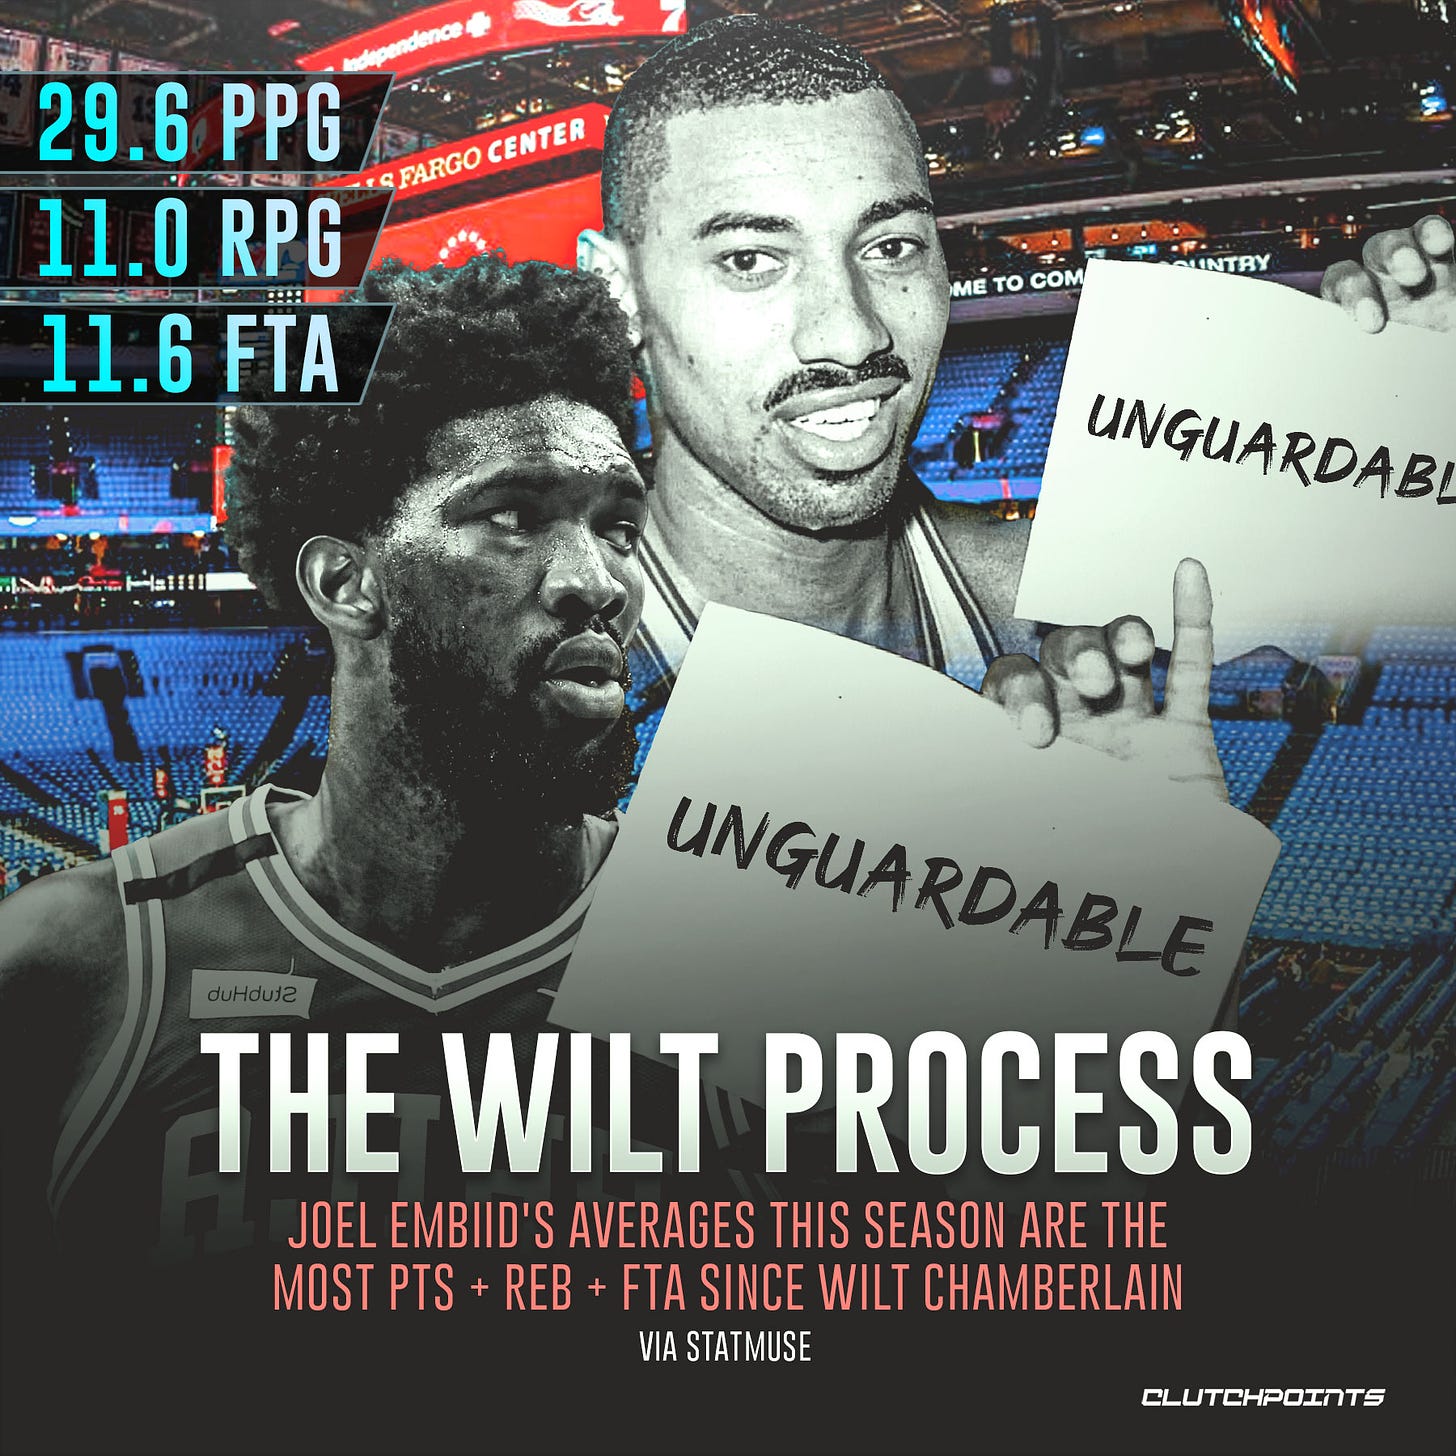 May be an image of 2 people and text that says 'CENTER FARGO 29.6 PPG 11.0 RPG 11.6 FTA ME το COM ”NTRY UNGUARDAB ARDAB UNGUARDABL THE WILT PROCESS JOEL EMB EMBIID'S AVERAGES THIS SEASON ARE THE MOST PTS REB FTA SINCE WILT CHAMBERLAIN VIA STATMUSE CLUTCHPOINTS'